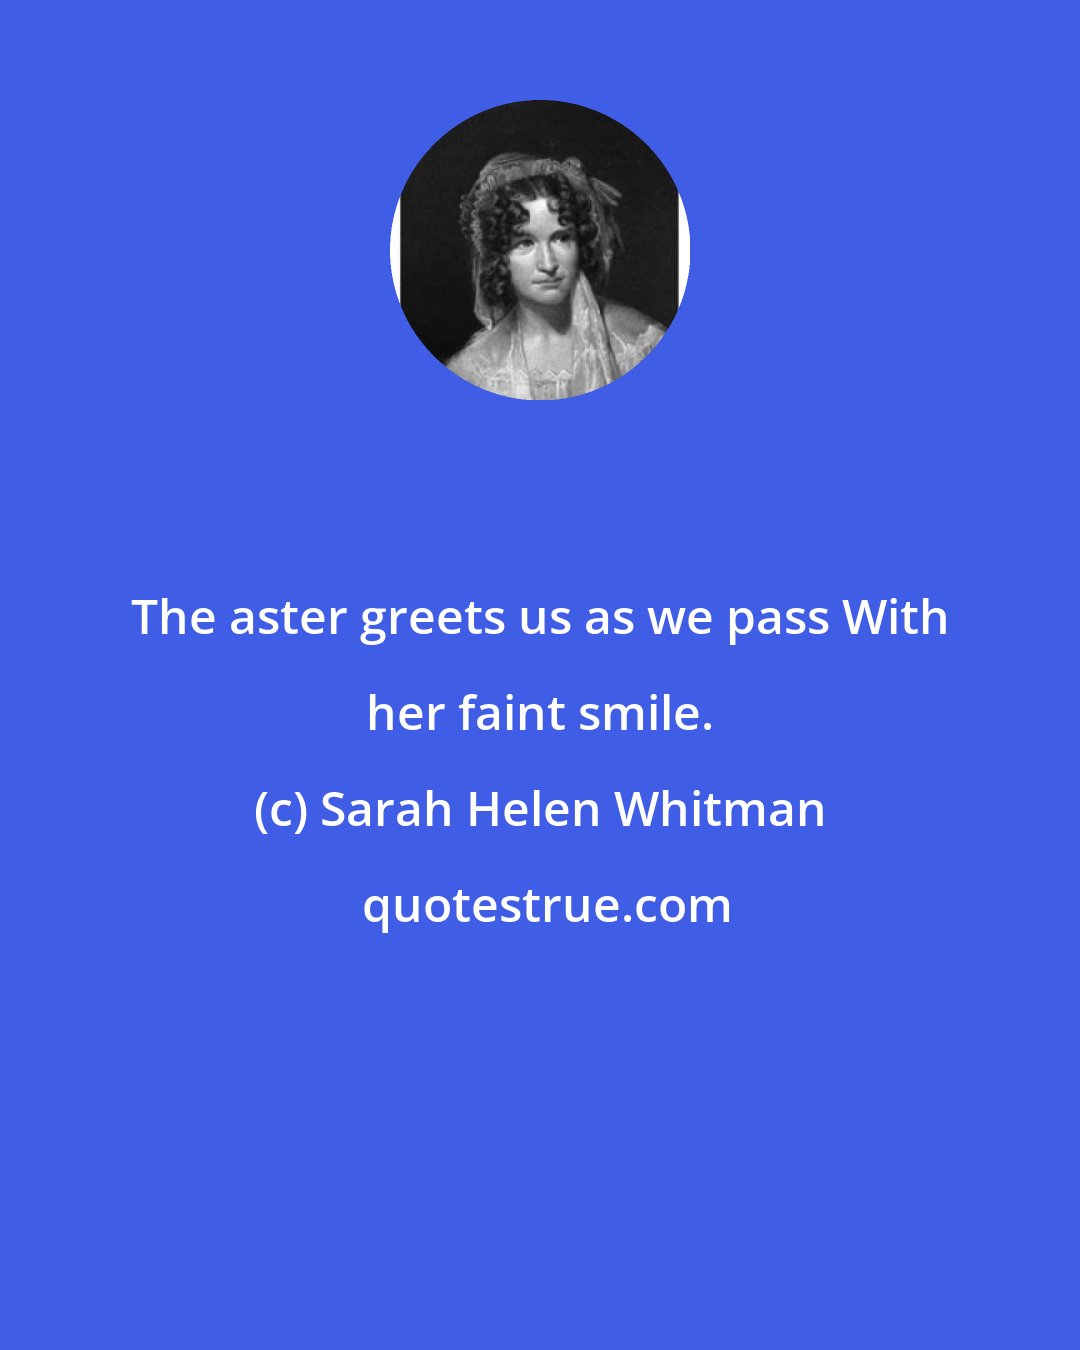 Sarah Helen Whitman: The aster greets us as we pass With her faint smile.